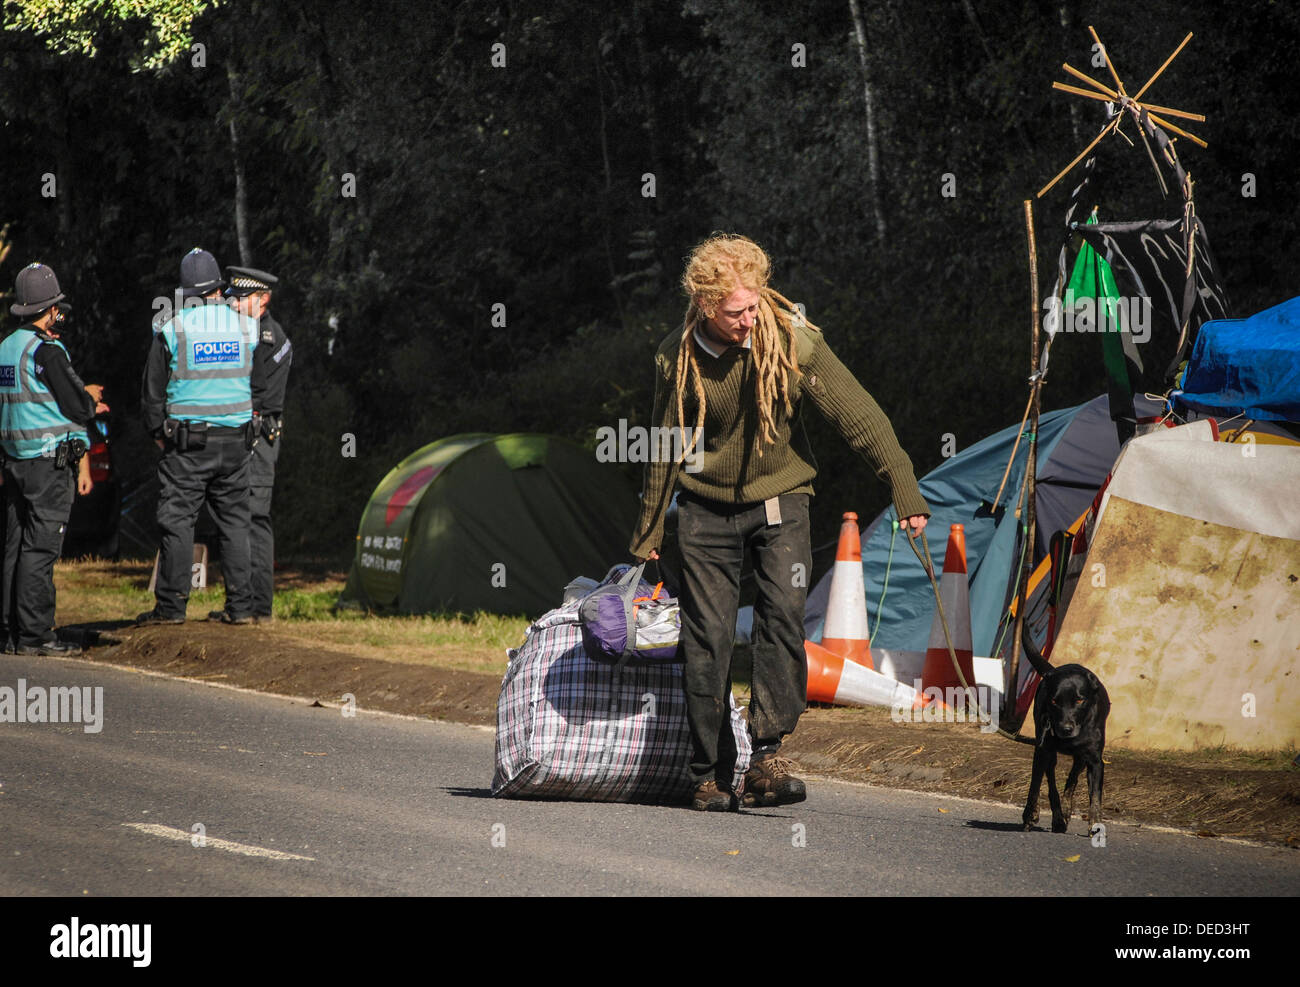 Balcombe, West Sussex, UK.16th Sep, 2013. Environmentalist having tidy up after overnight wind and rain battered the roadside camp .Environmentalists rejoiced after todays failed attempt by West Sussex County  in the high court, due flawed case, to evict them from the road side camp.  Credit:  David Burr/Alamy Live News Stock Photo